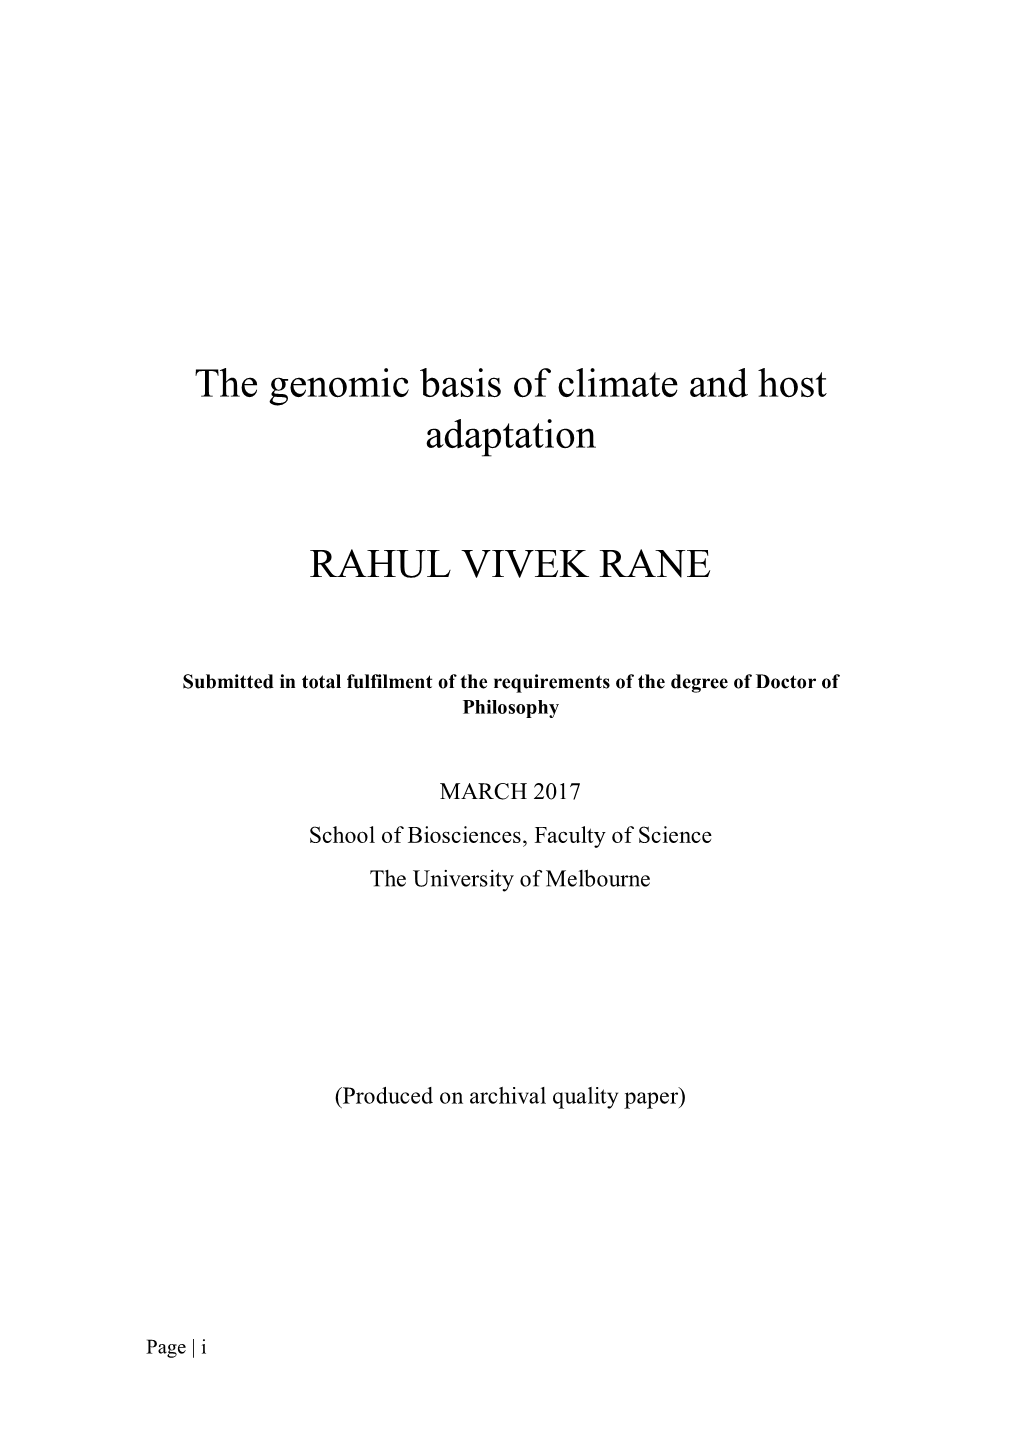 Complete Thesis: the Genomic Basis of Climate and Host Adaptation